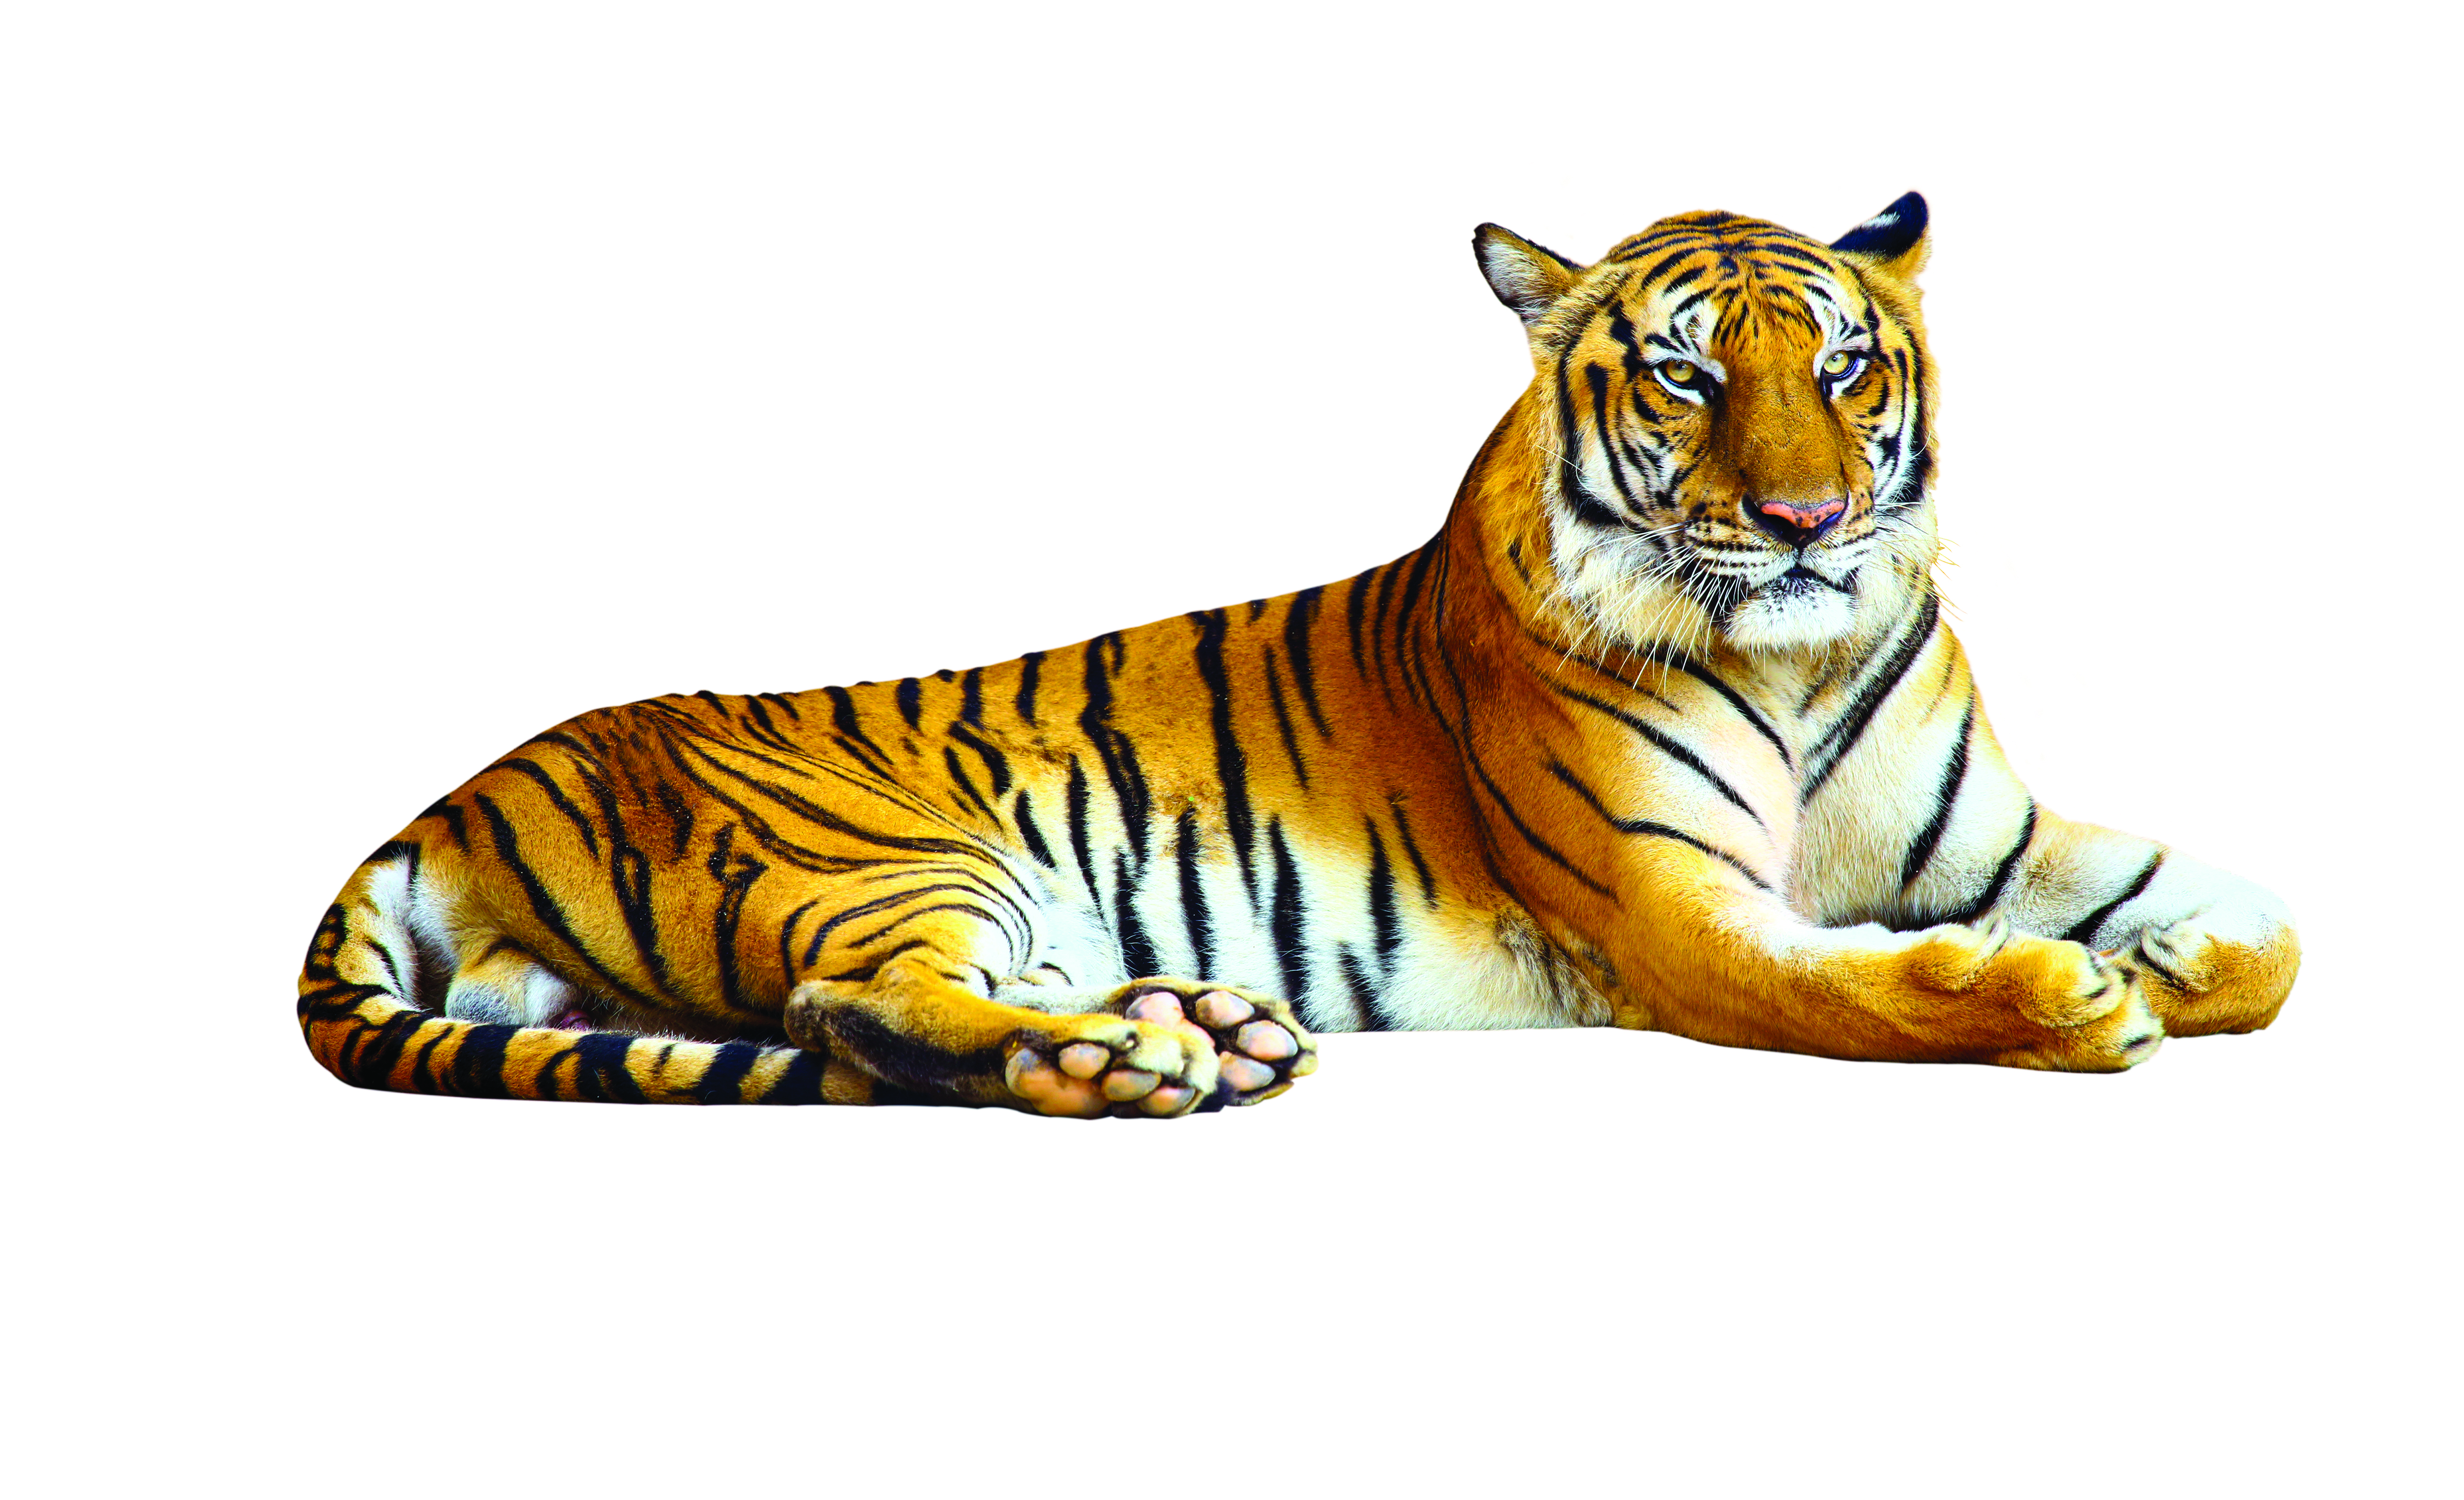 Fact file about tigers